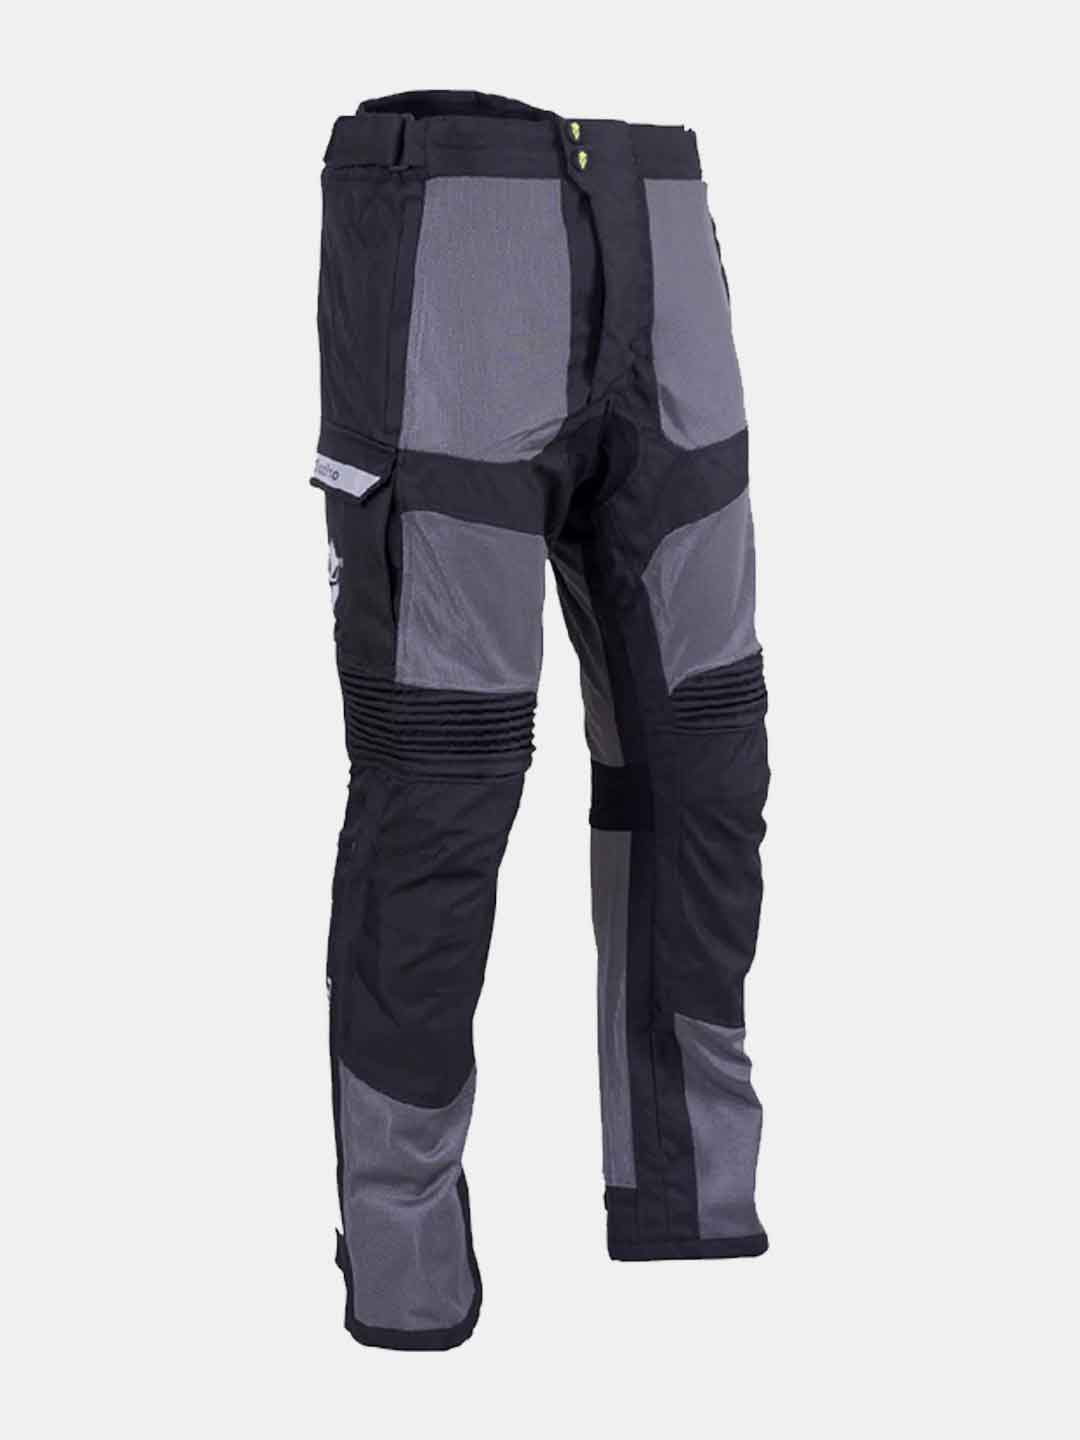 Amazon.com: HWK Motorcycle Pants with Water Resistant Cordura for Enduro  Motocross, Impact Armor and 30-32